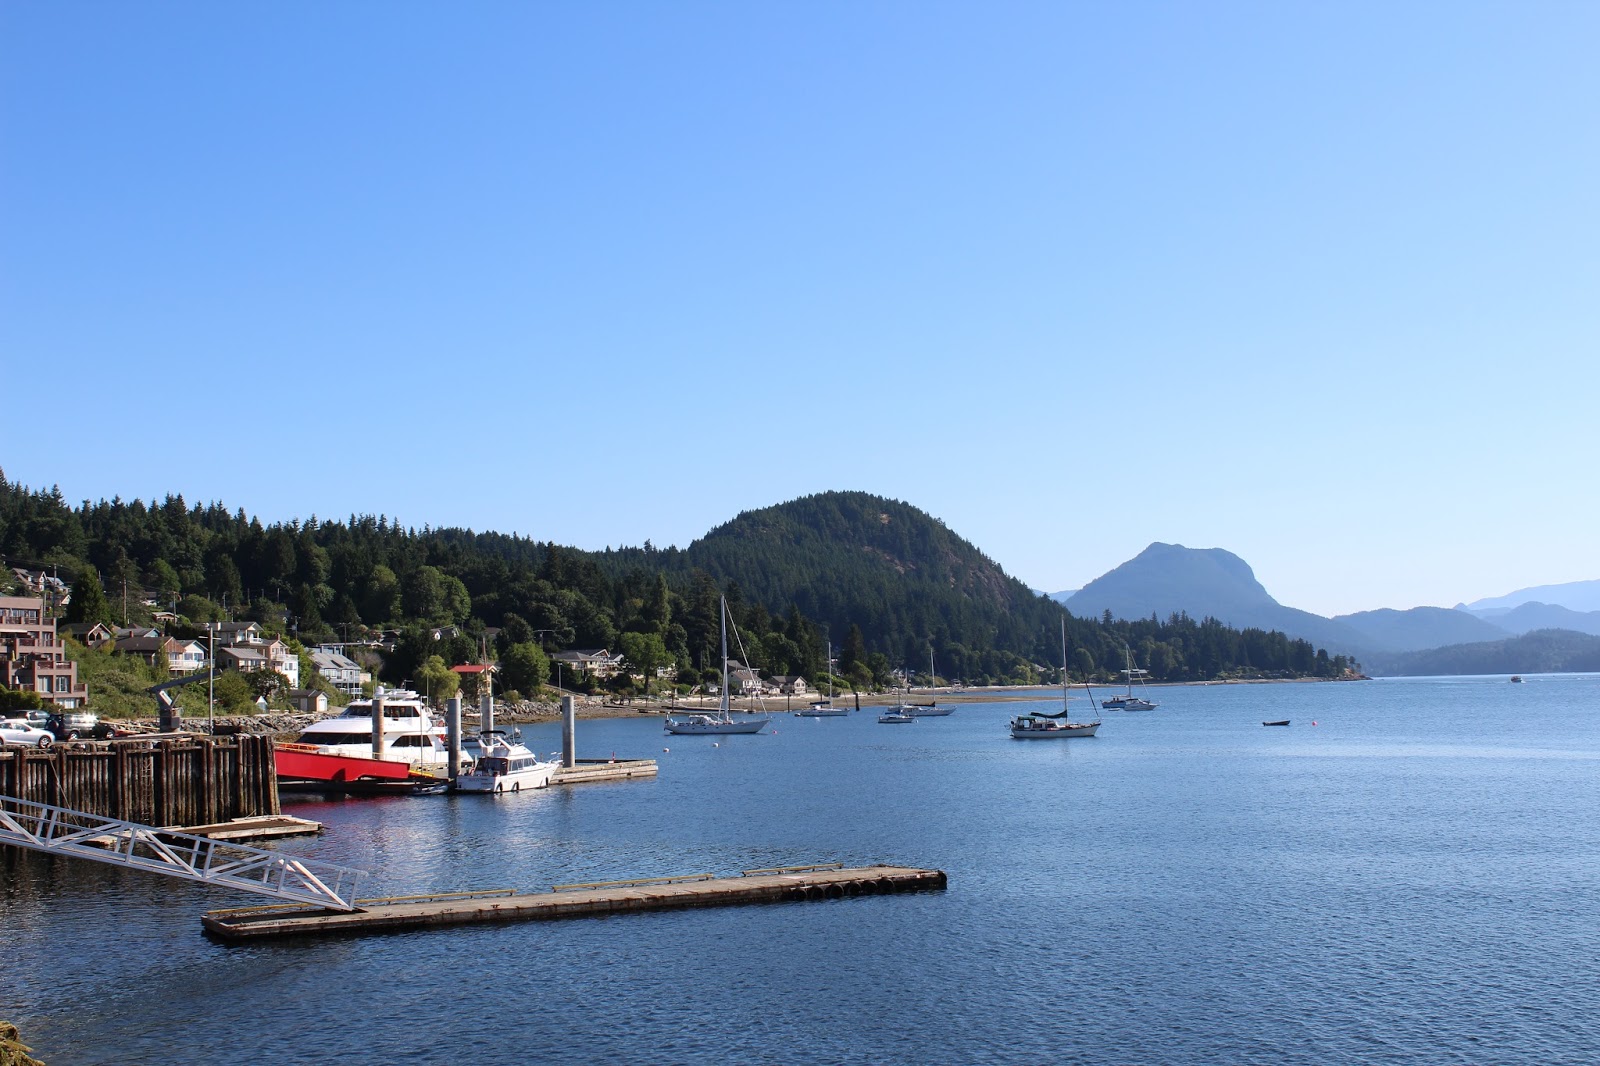 BC's Sunshine Coast - More Images of Gibsons